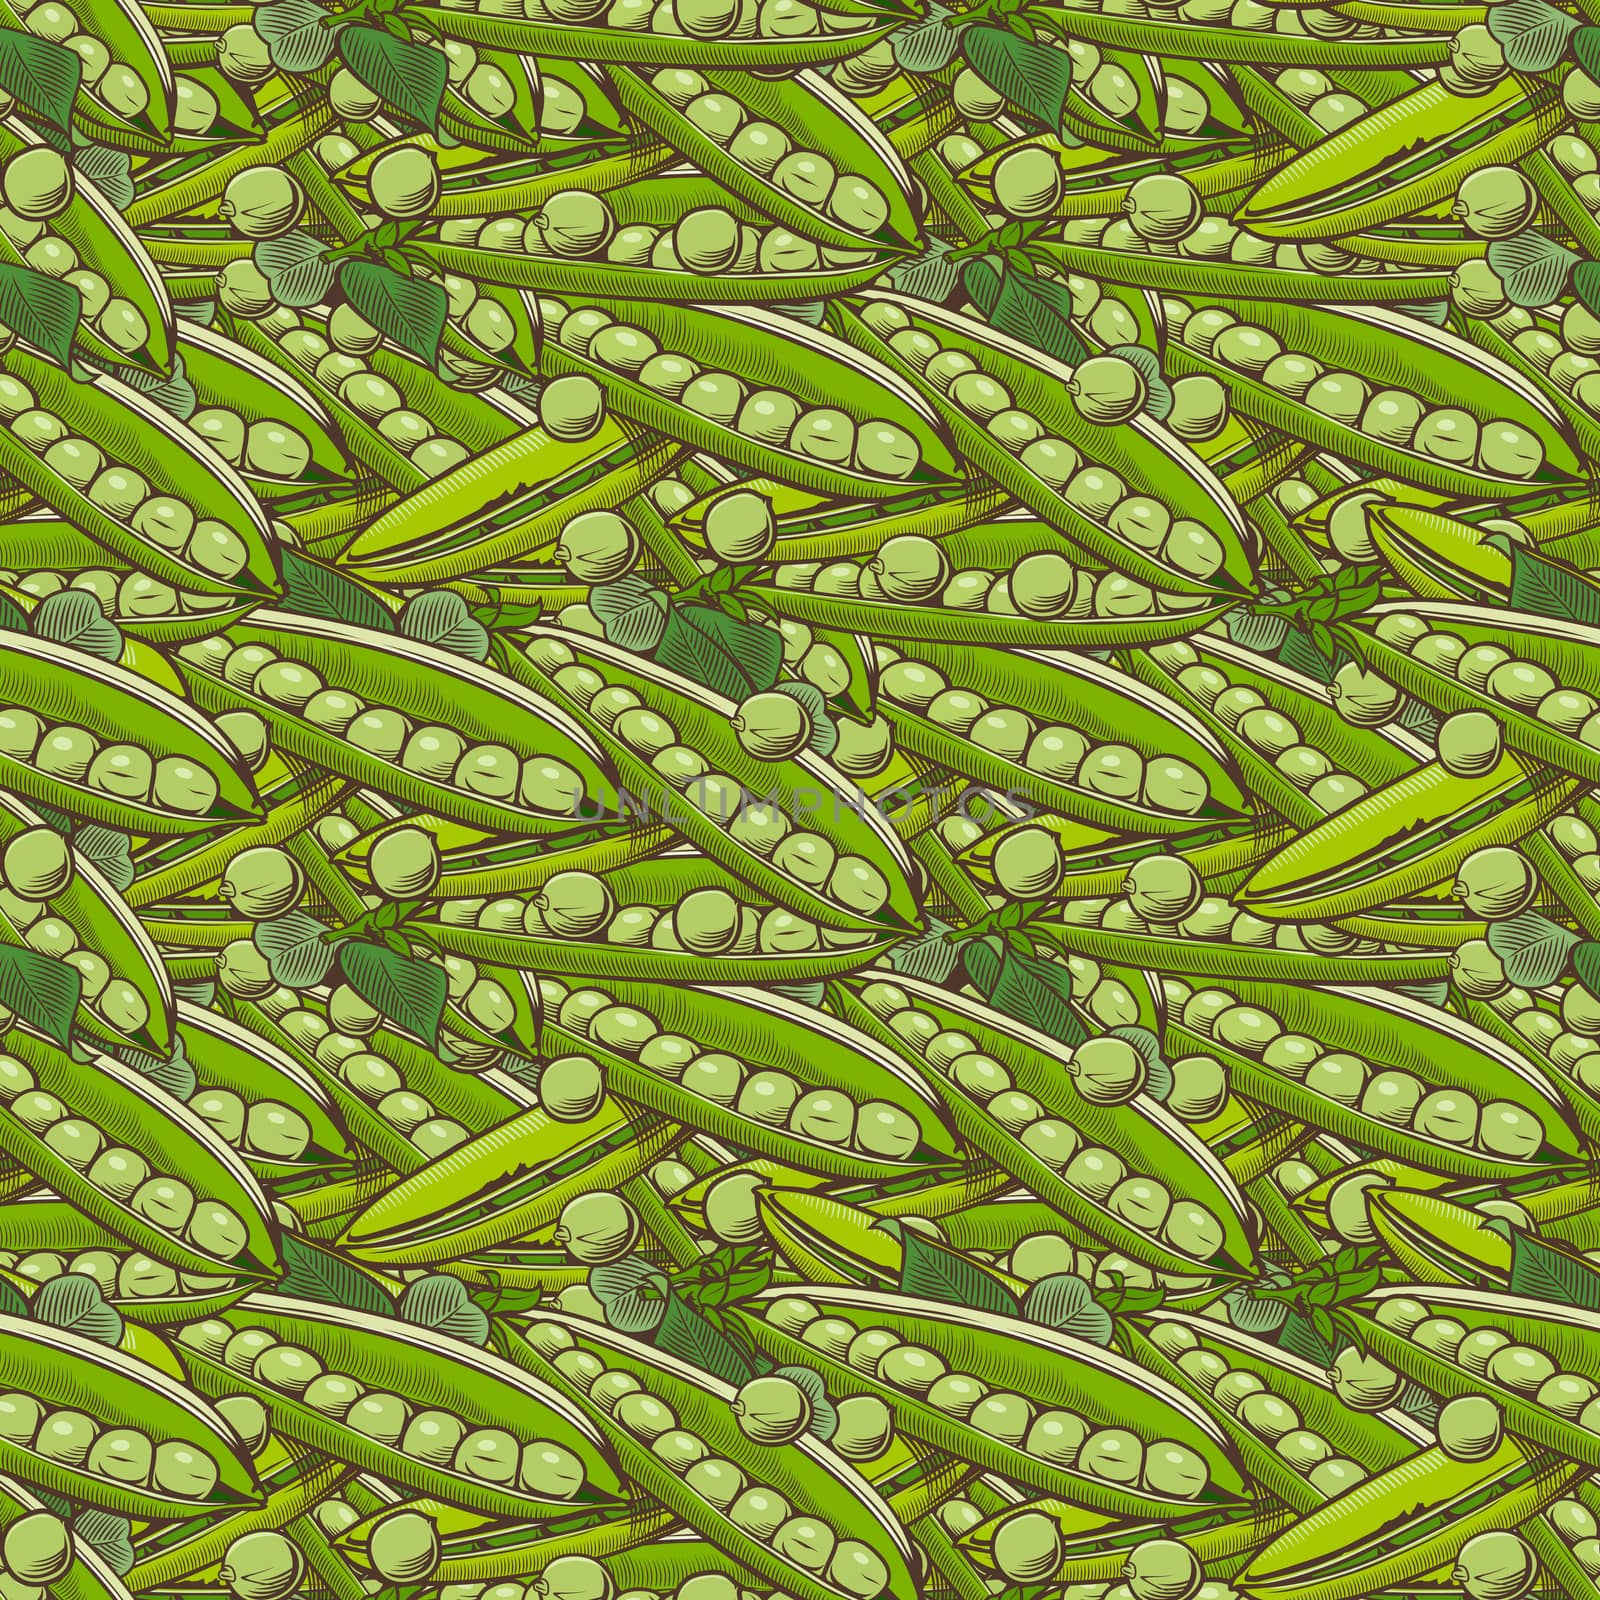 Vintage Green Pea Seamless Pattern by ConceptCafe